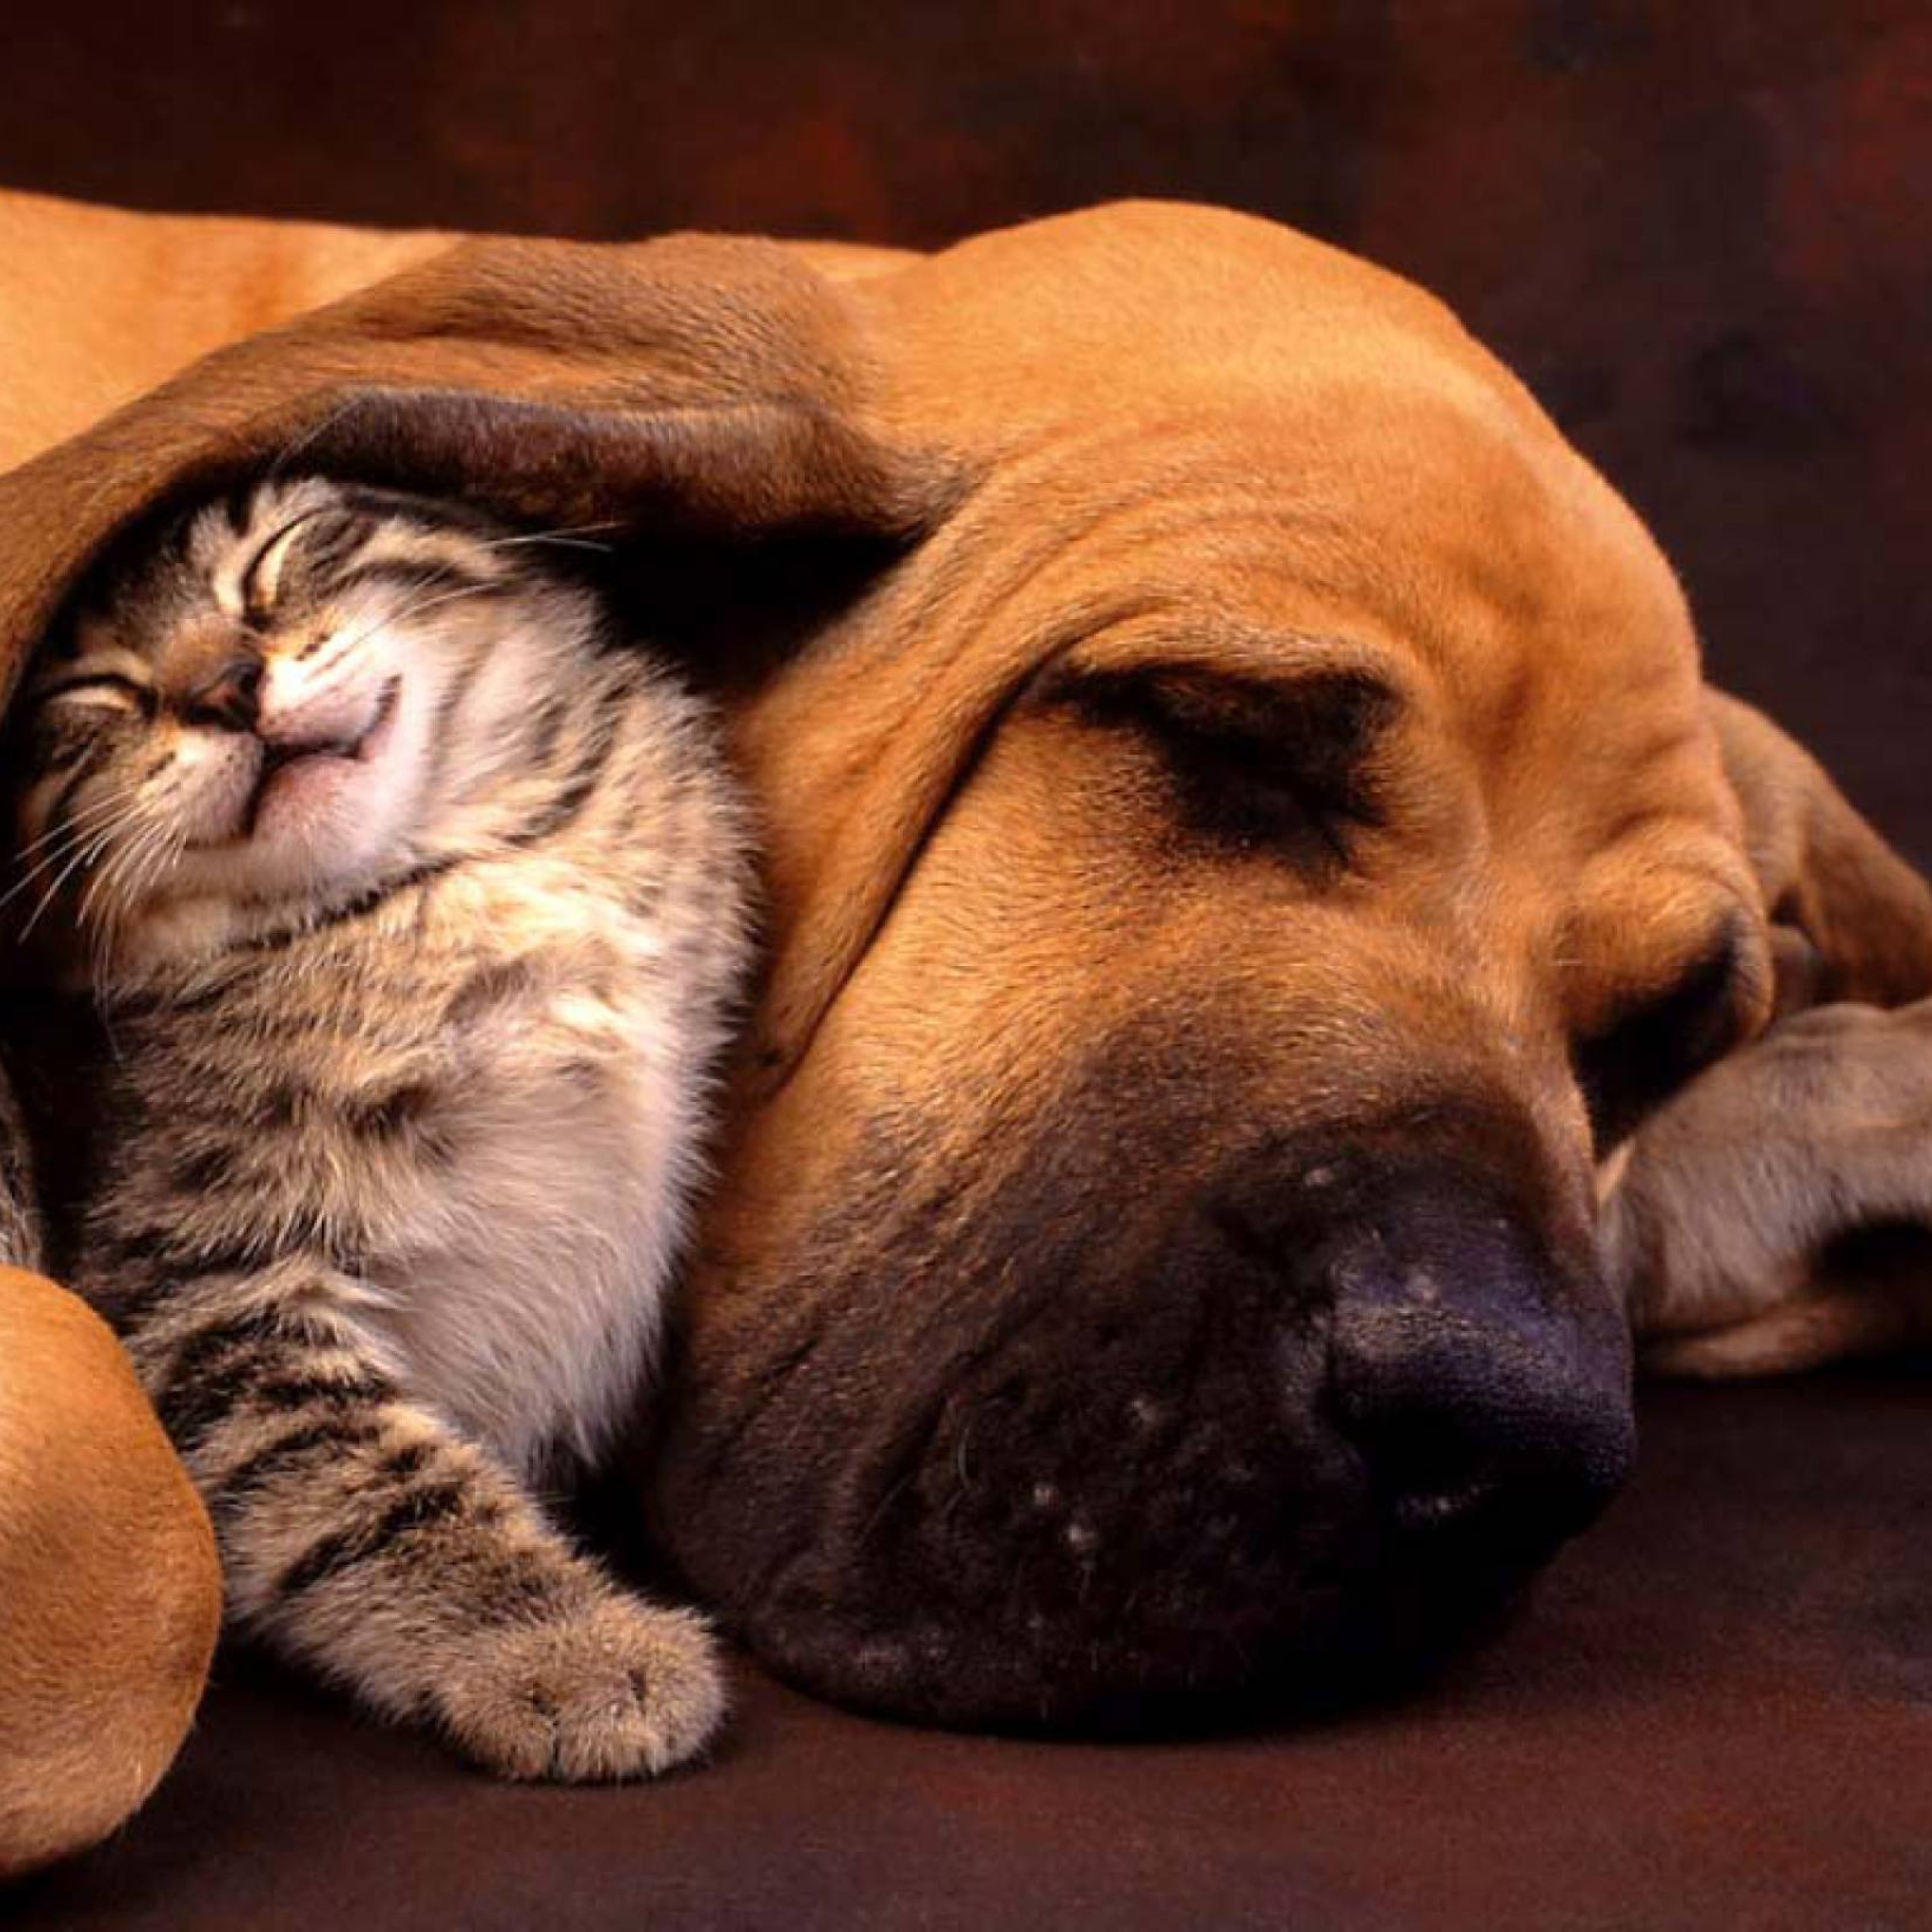 Cat and Dog Are Te Best Friend wallpaper 2048x2048